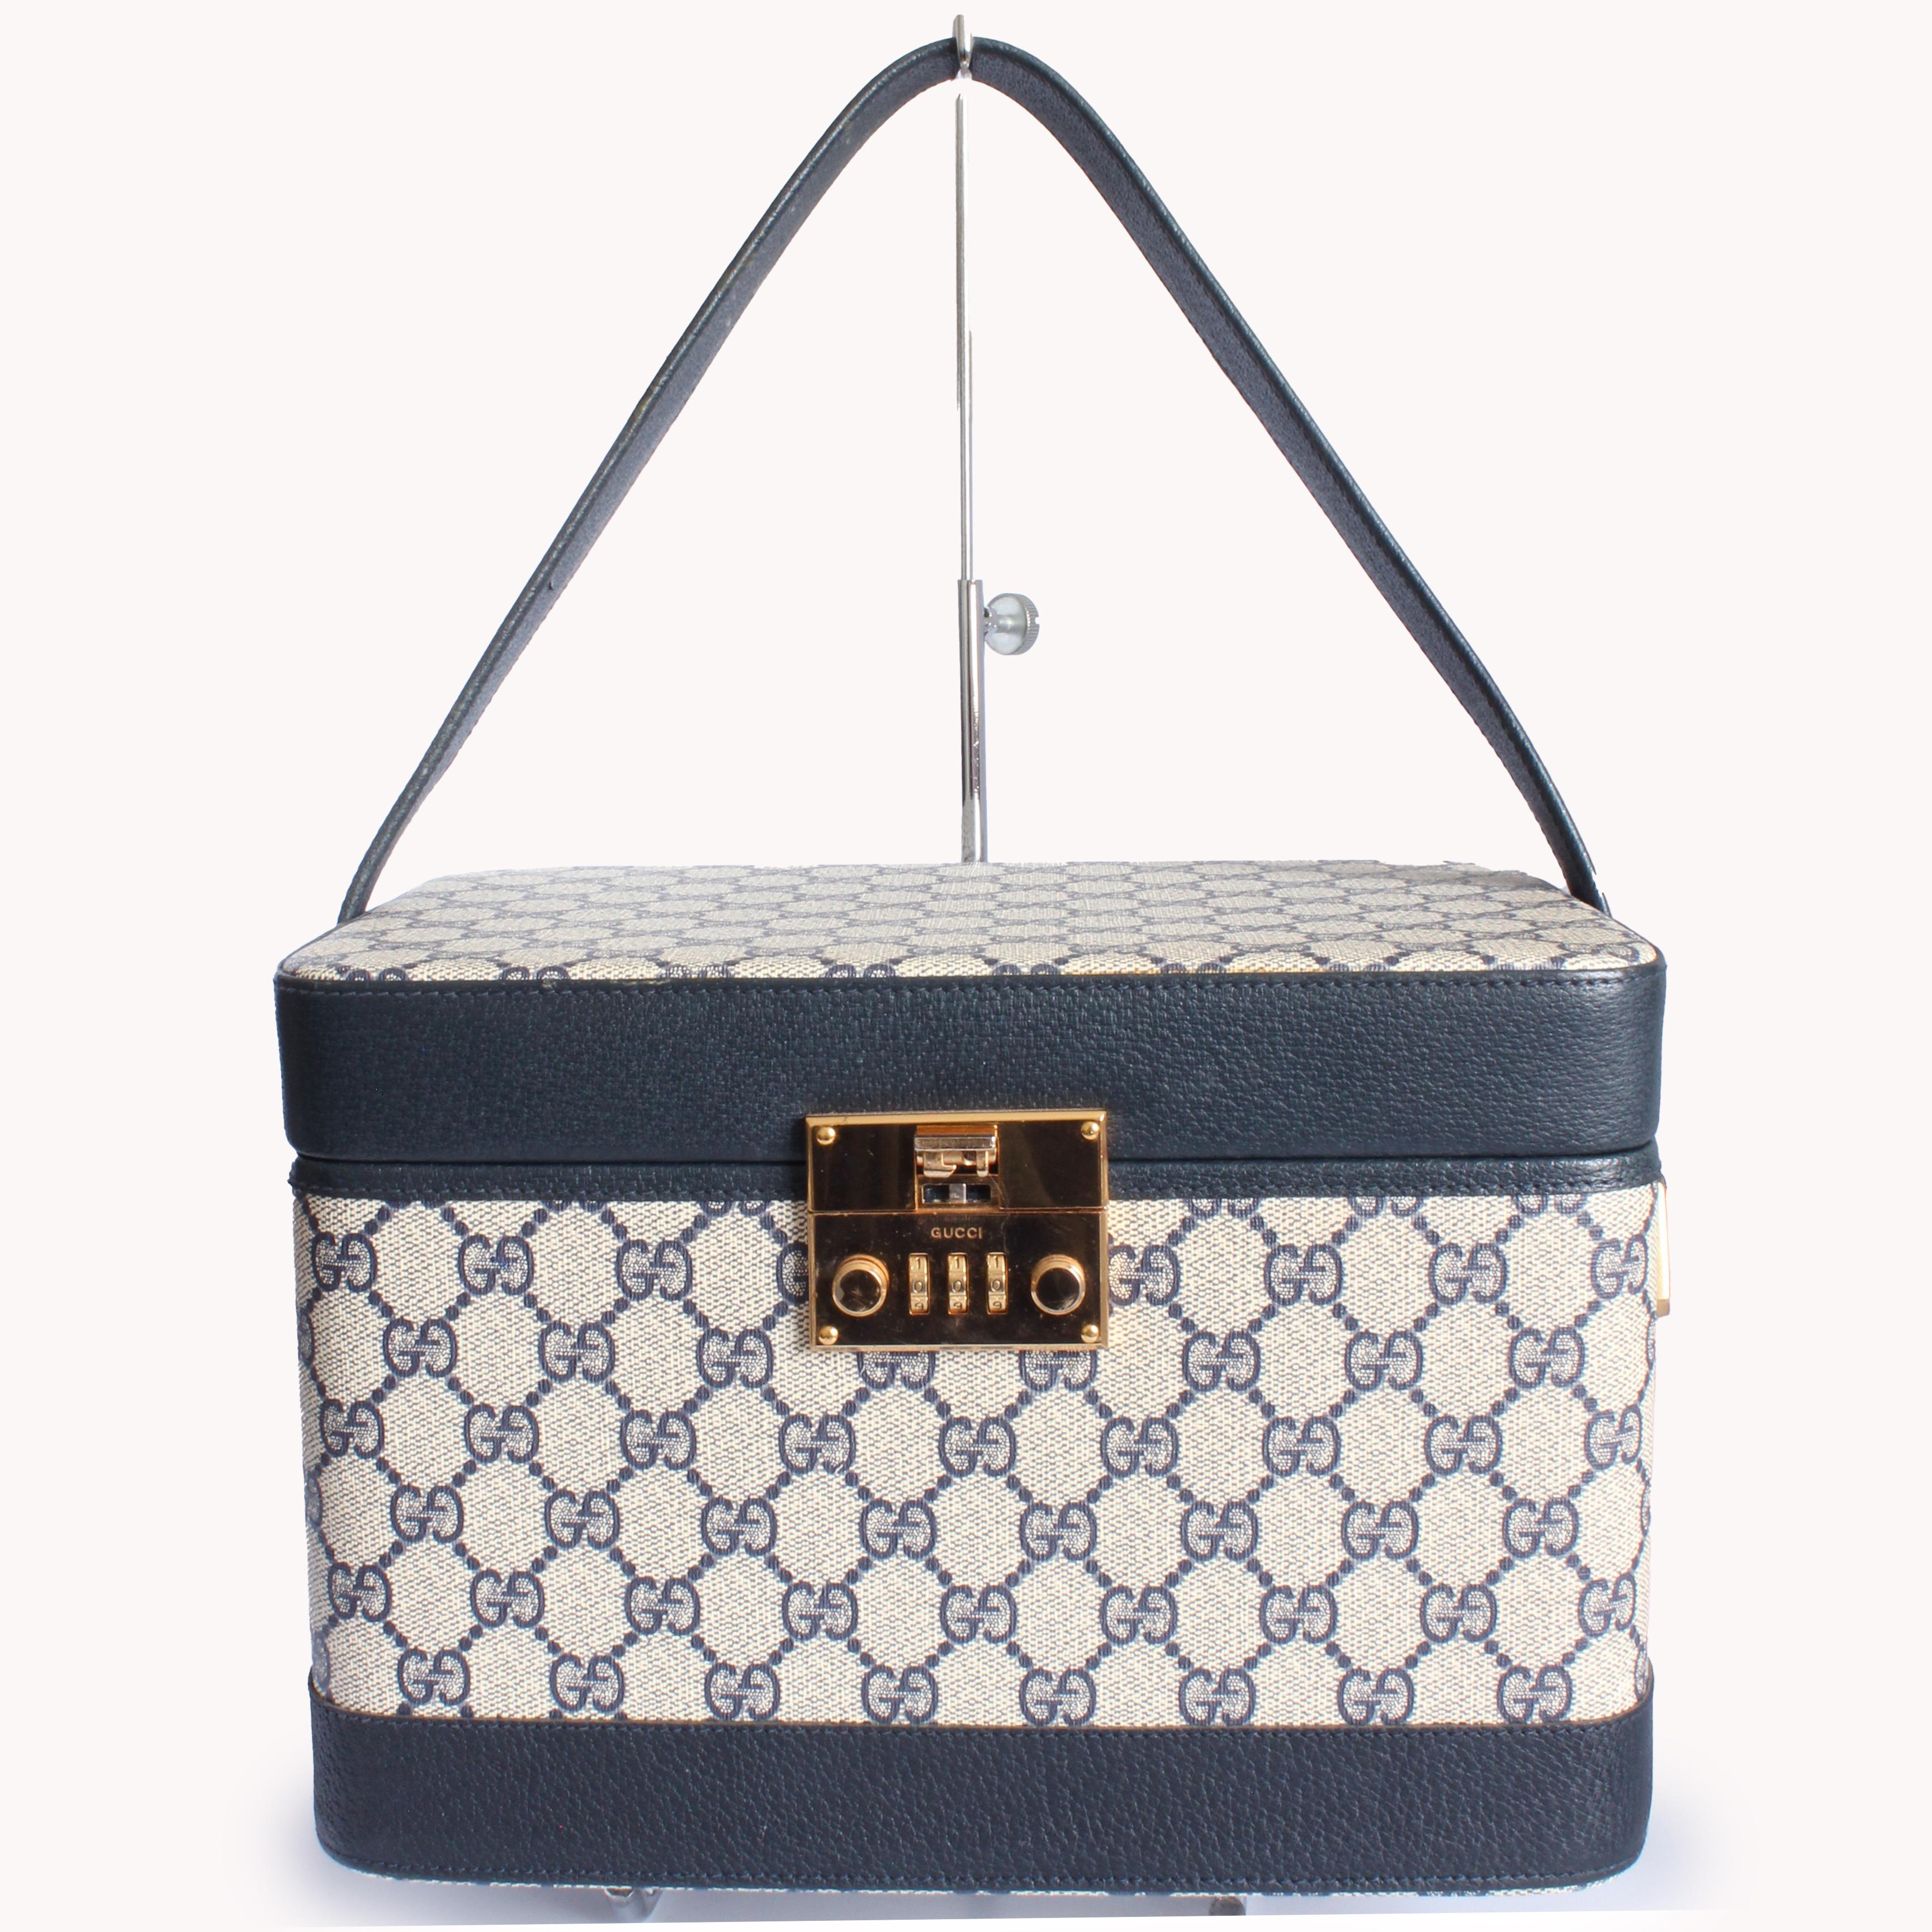 Travel in style with this incredible vintage train case made by GUCCI, most likely in the 1980s.  Made from their signature GG logo canvas, it's trimmed in navy leather and has gold hardware.  The interior is lined in navy leather and features a